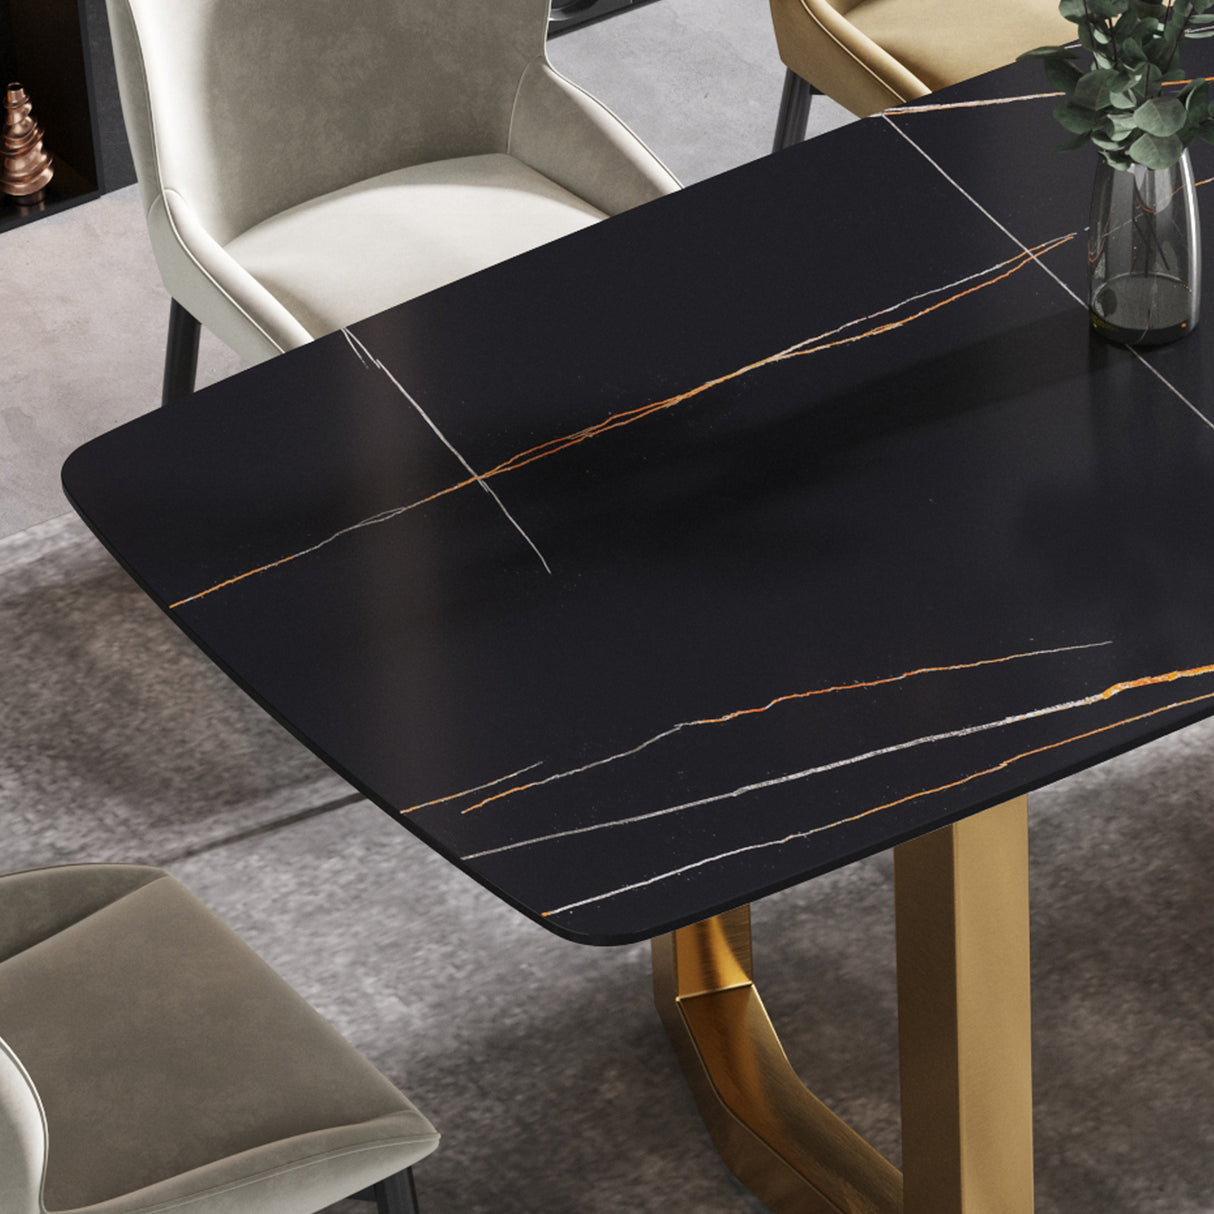 63"Modern artificial stone black curved golden metal leg dining table -6 people - Home Elegance USA